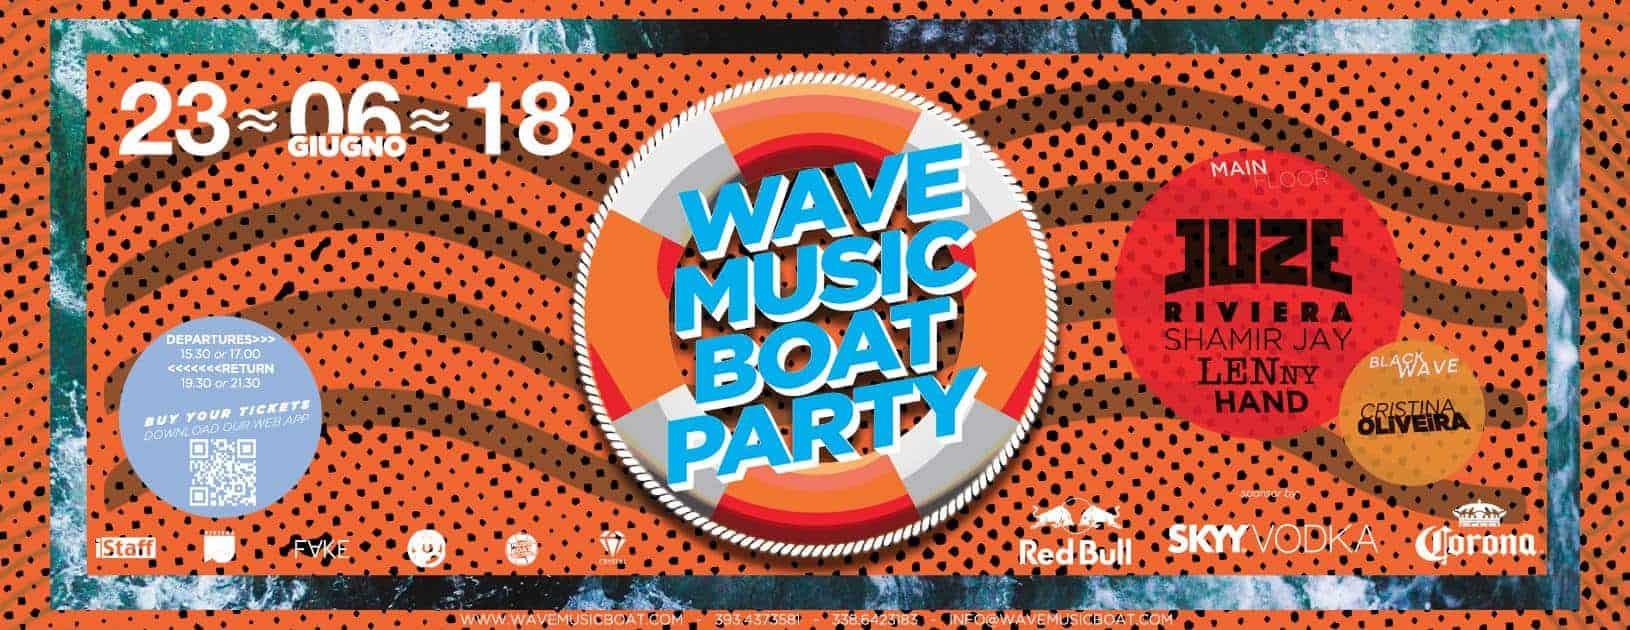 Wave Music Boat 2018